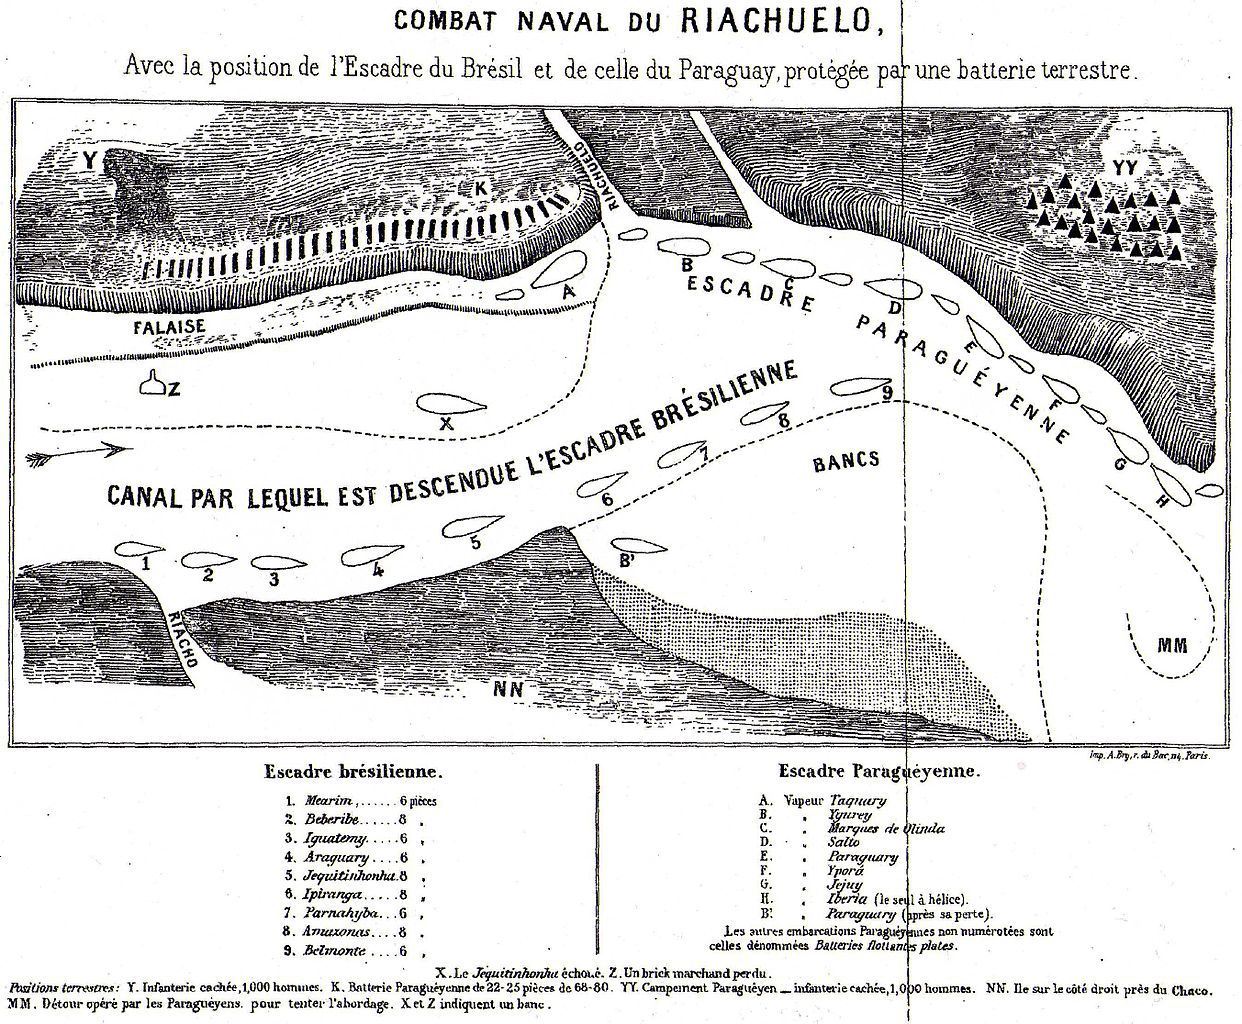 Battle of Riachuelo: Position of Braziian and Paraguayan Squadrons